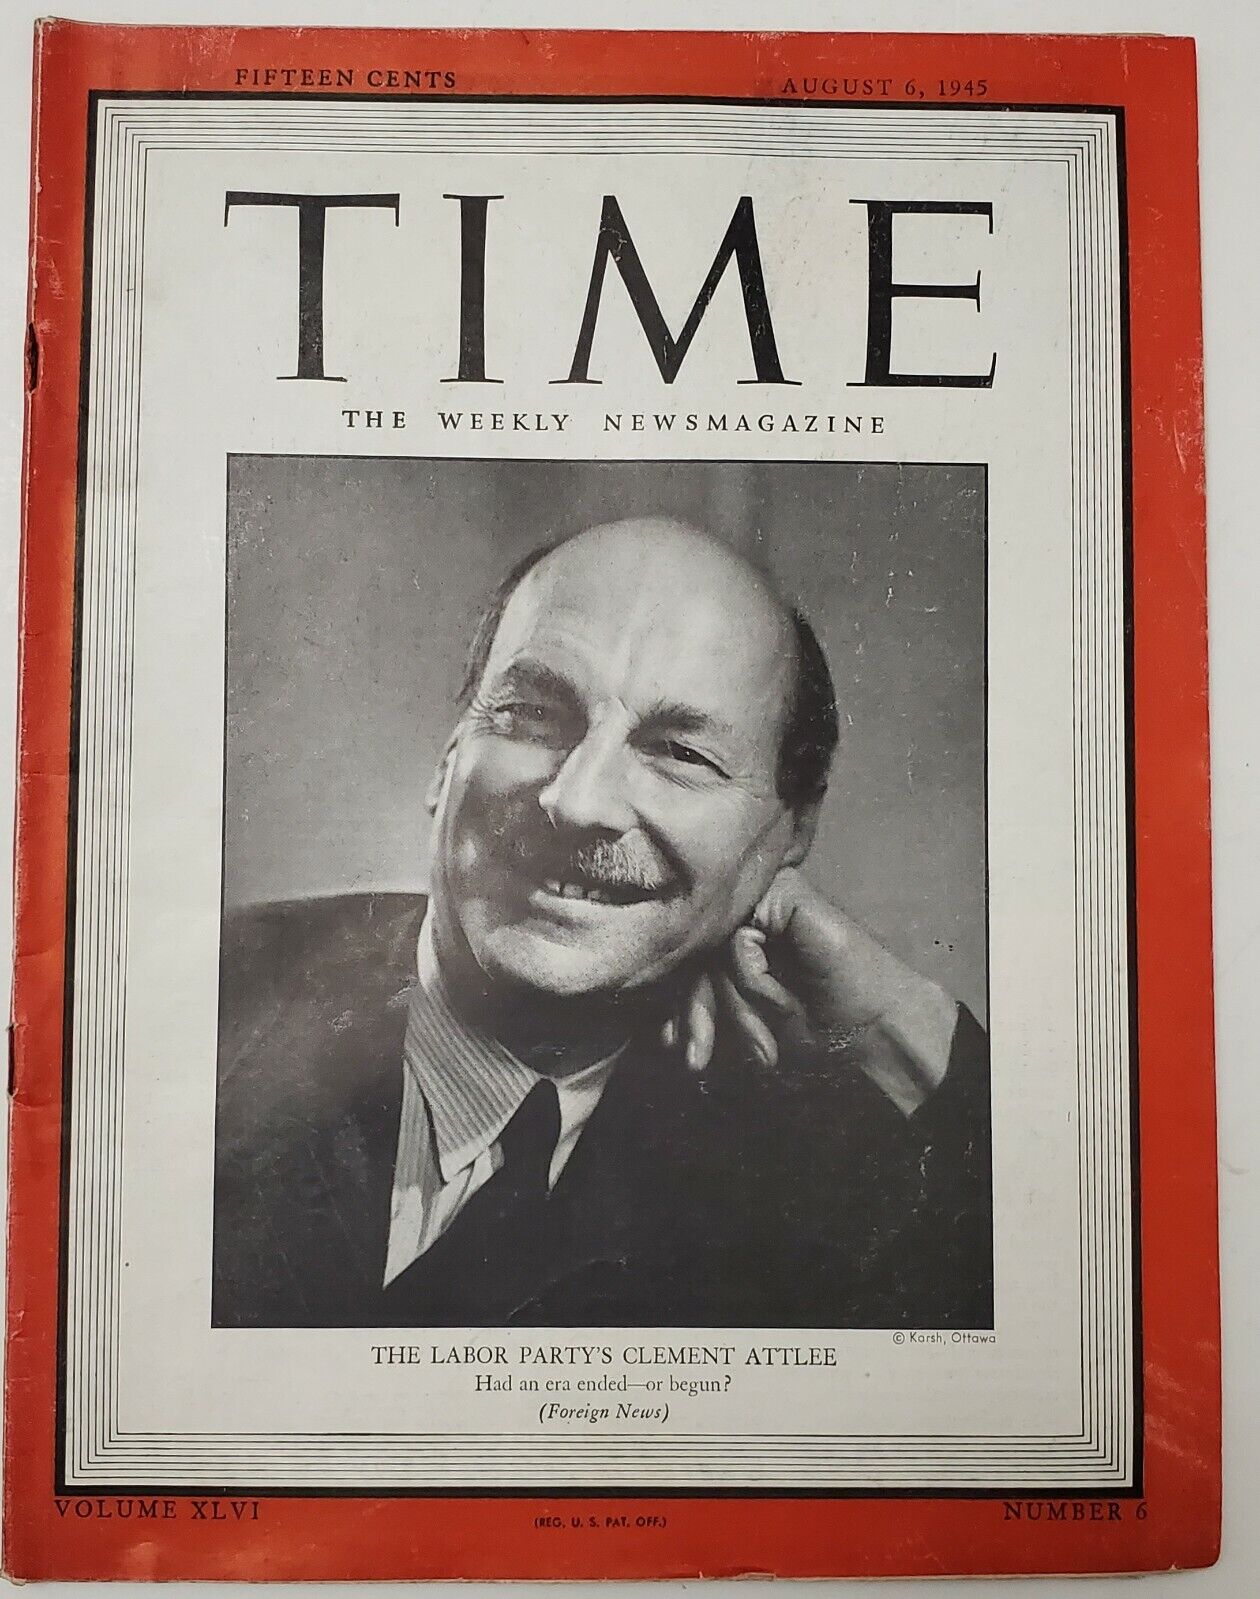 TIME THE WEEKLY MAGAZINE FEATURING THE LABOR PARTY'S CLEMENT ATTLEE VINTAGE 1945